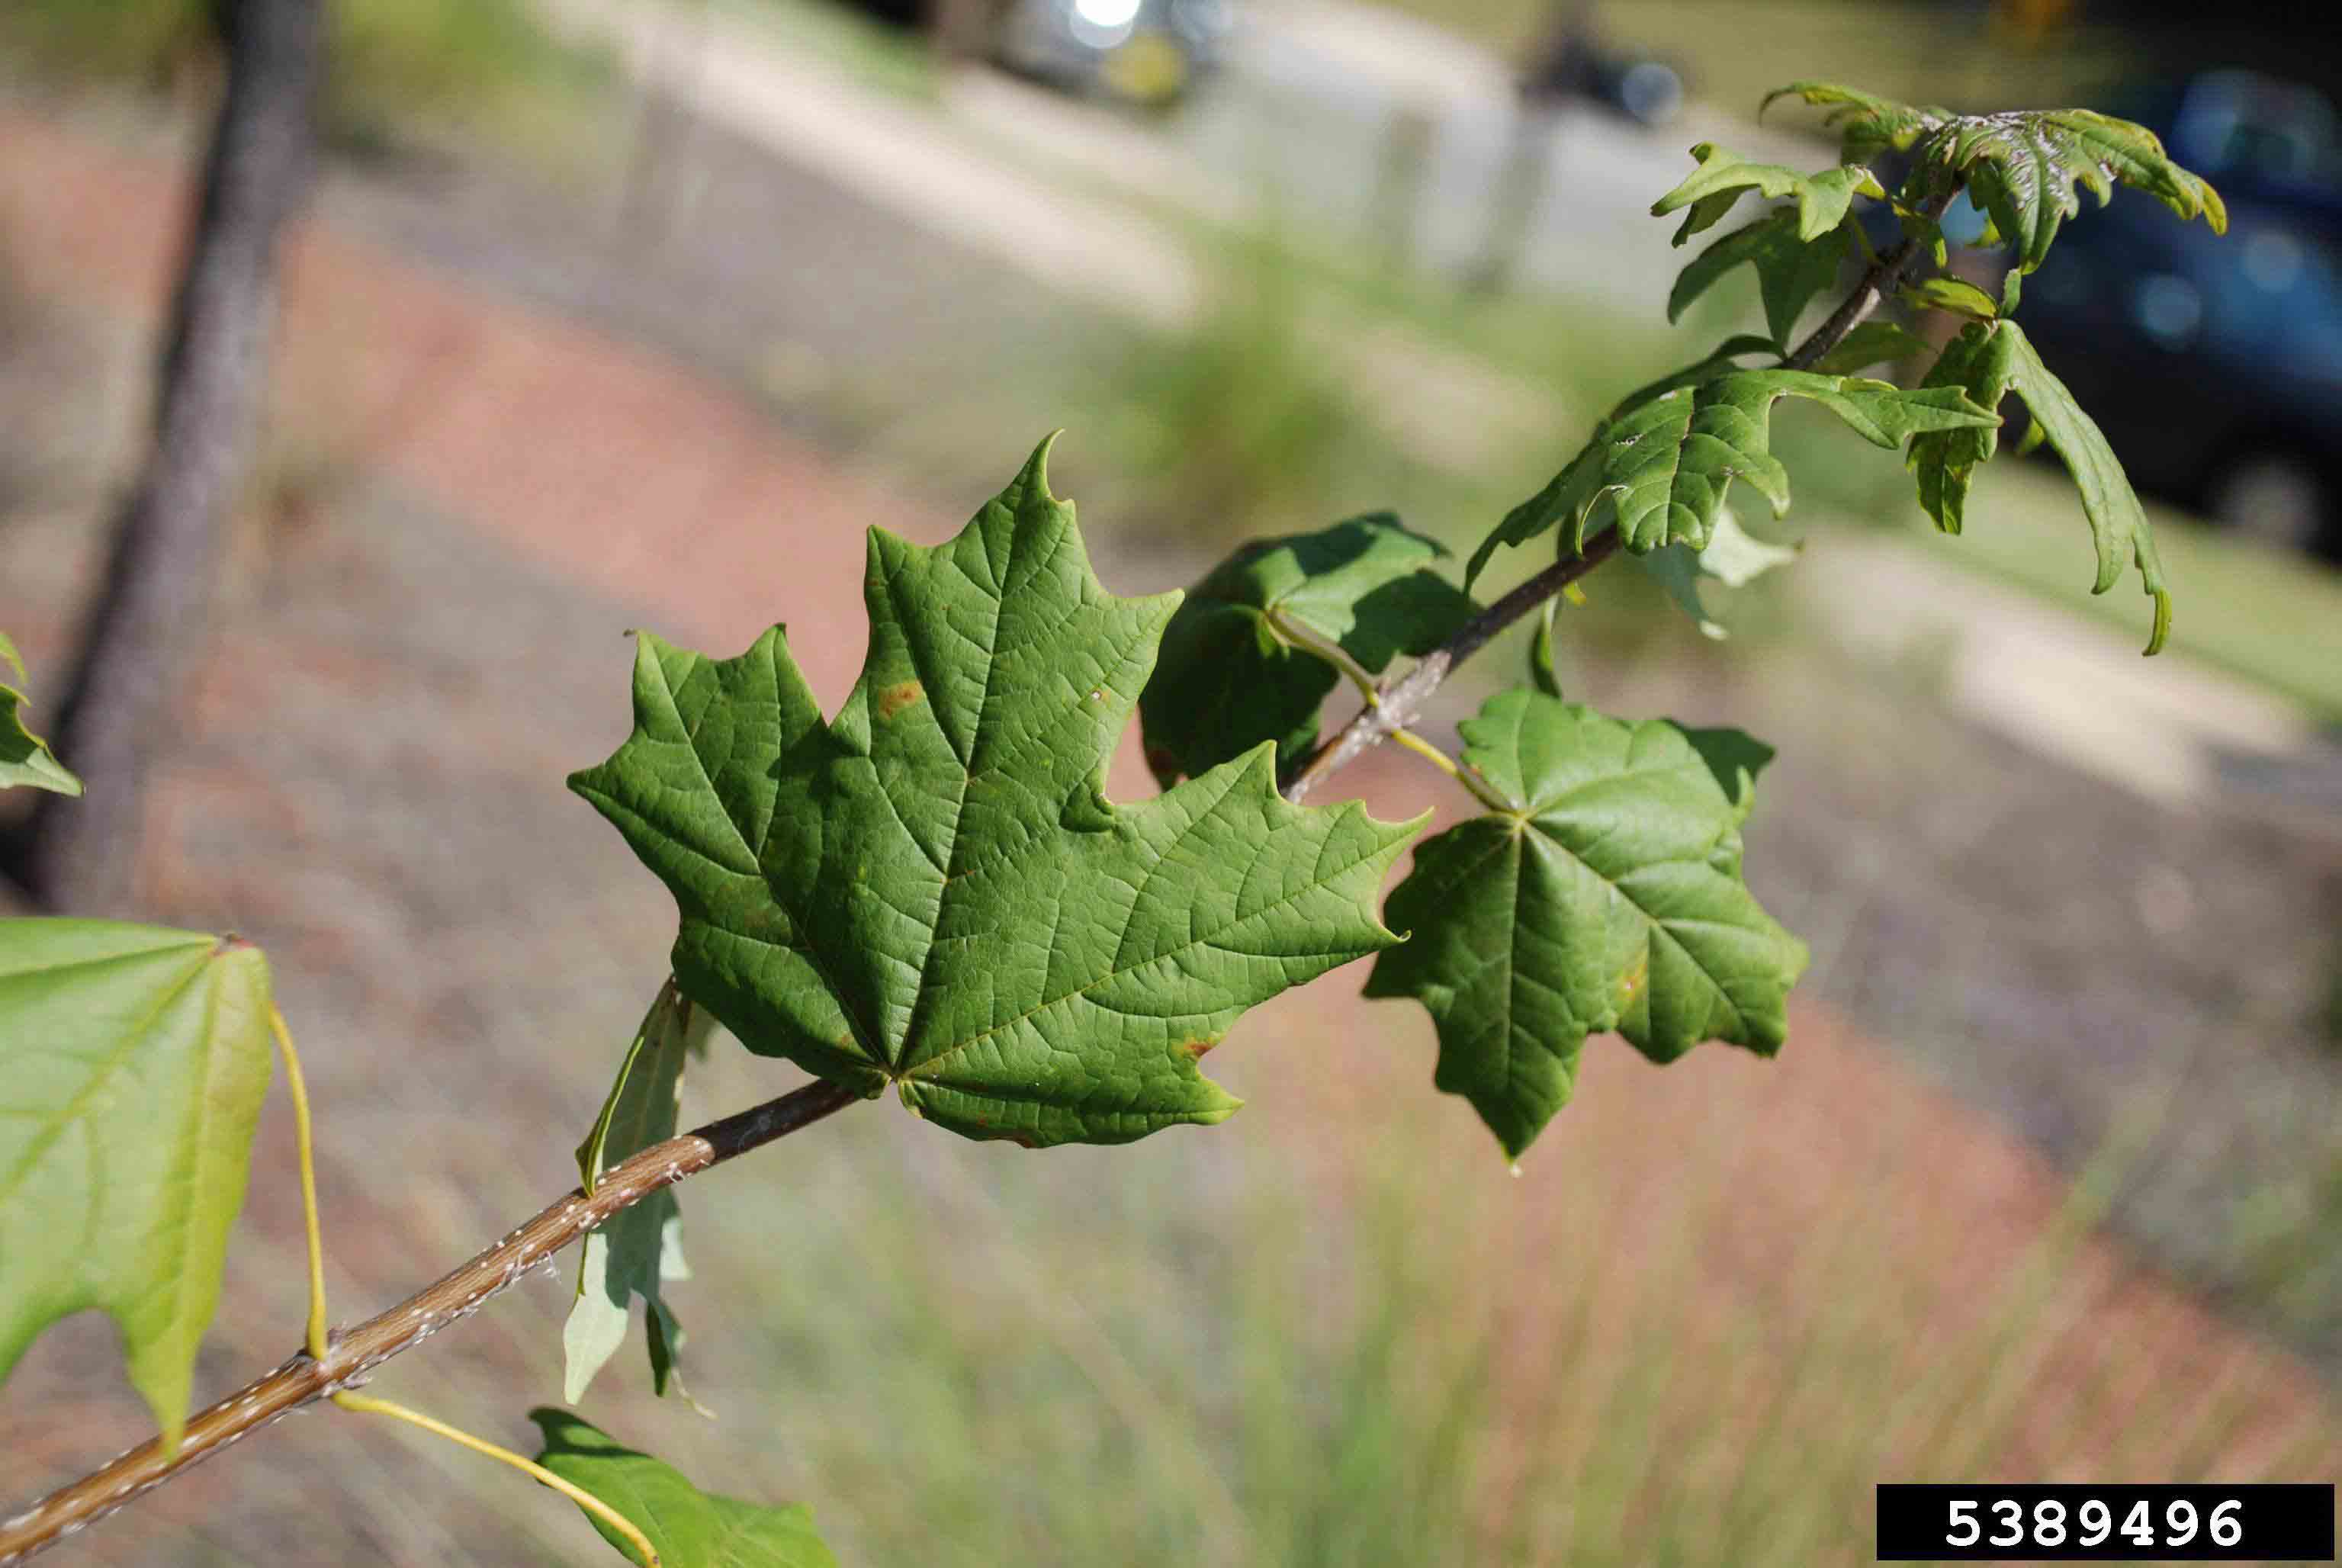 Southern sugar maple leaves, showing opposite arrangement